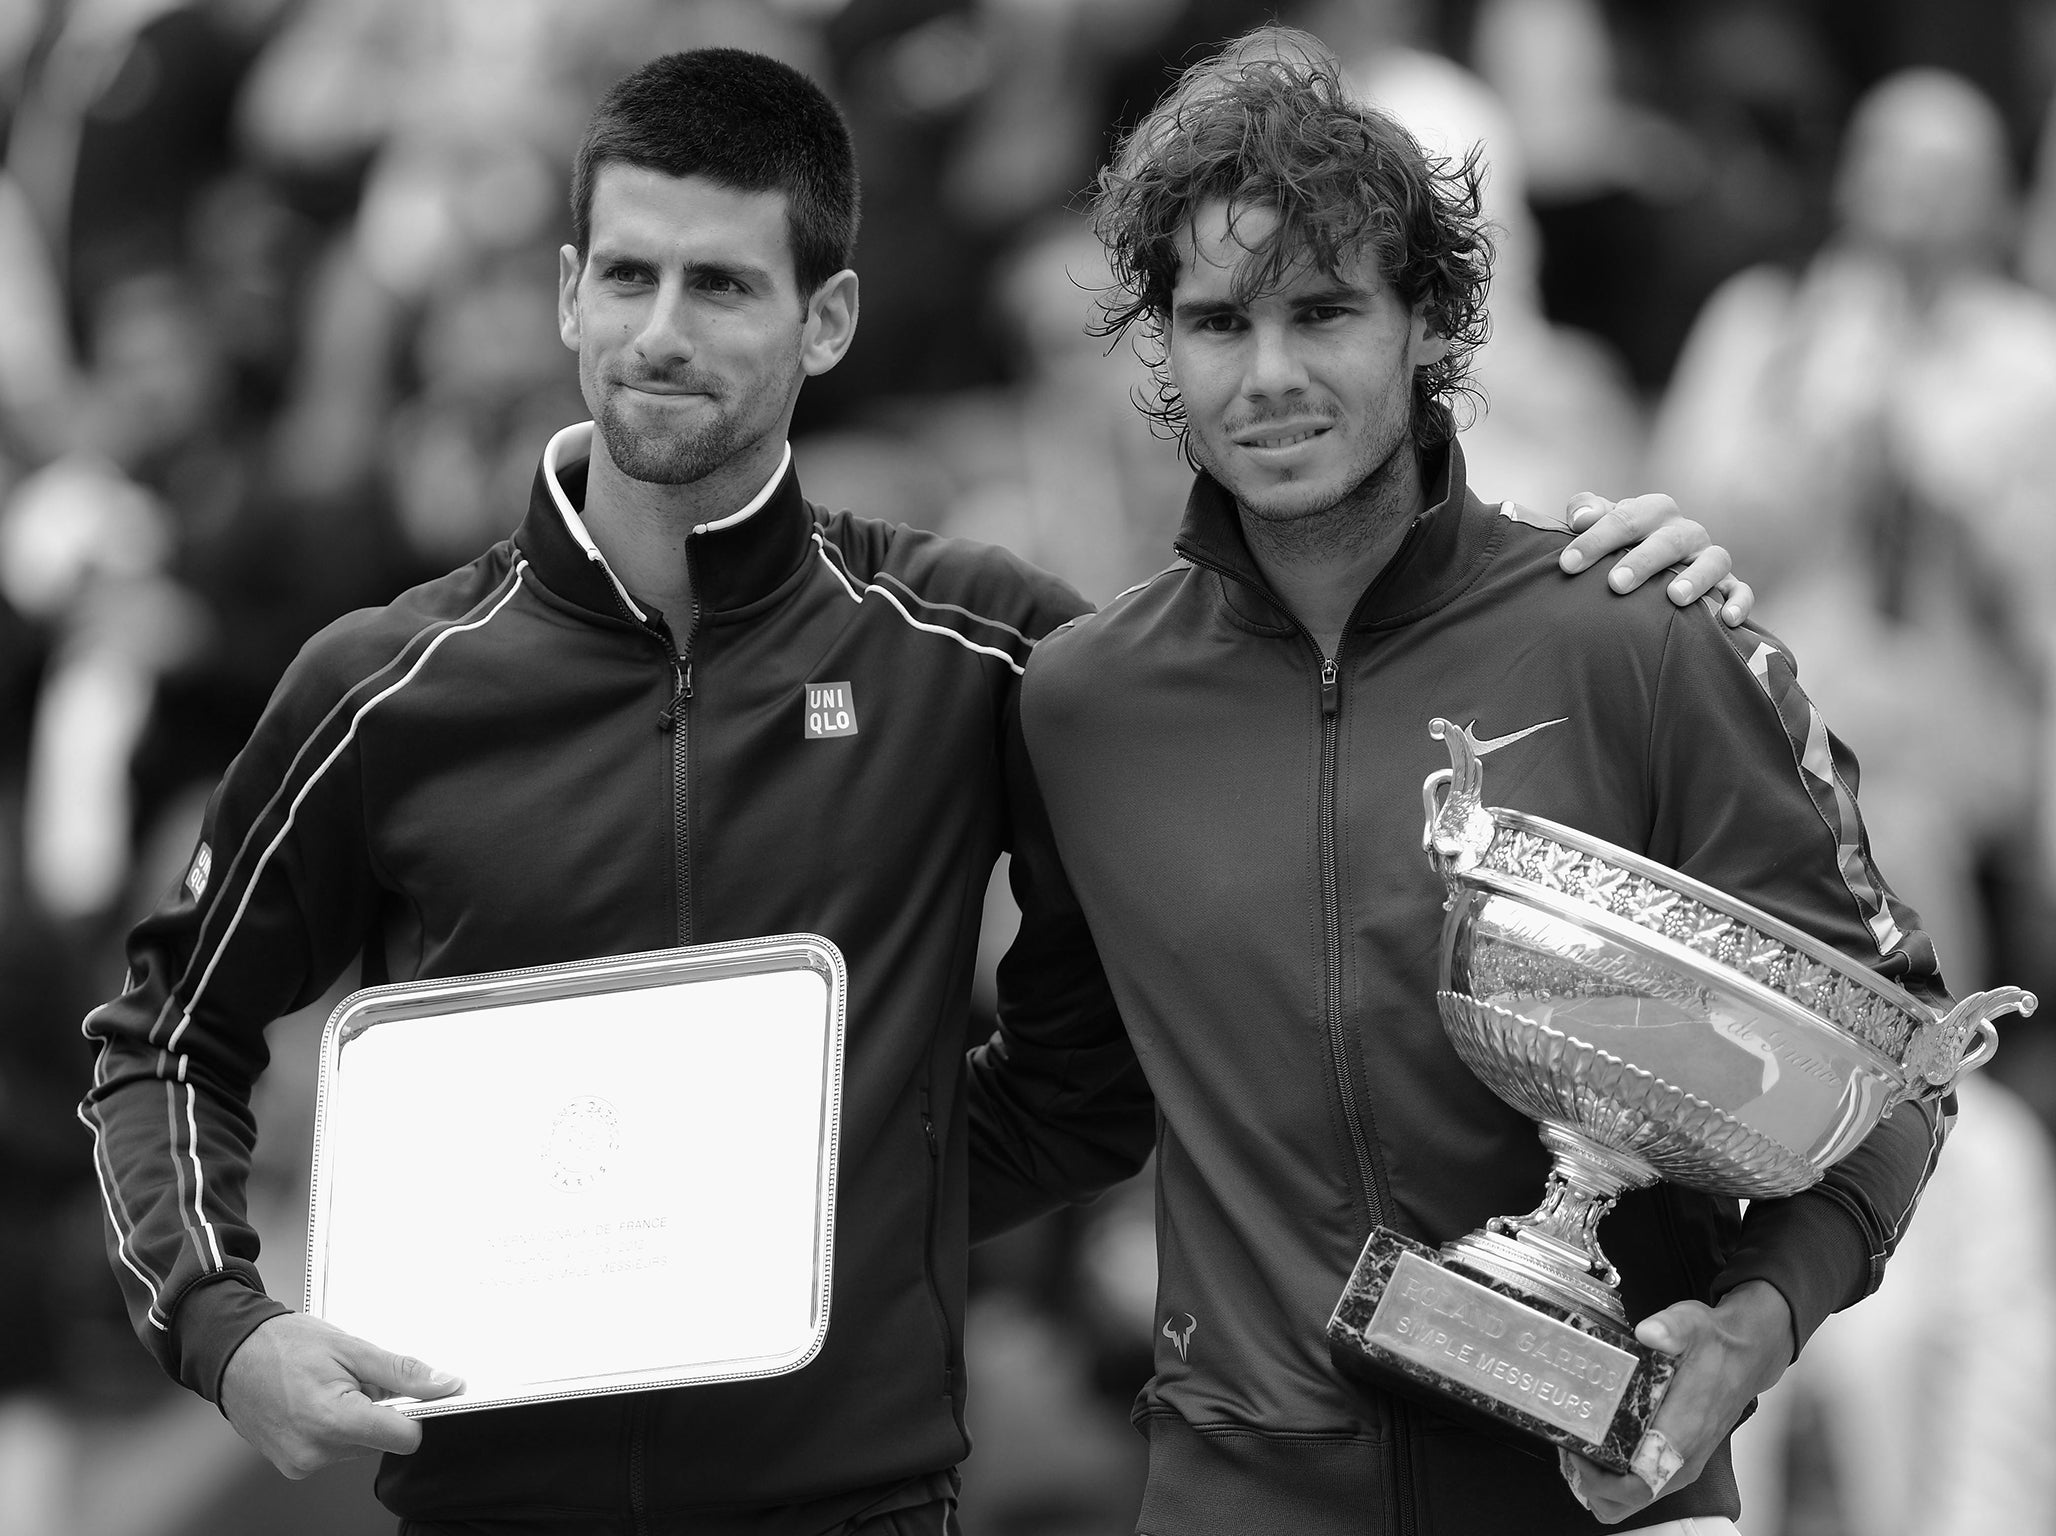 Djokovic and Nadal were scheduled to play an exhibition in Jeddah